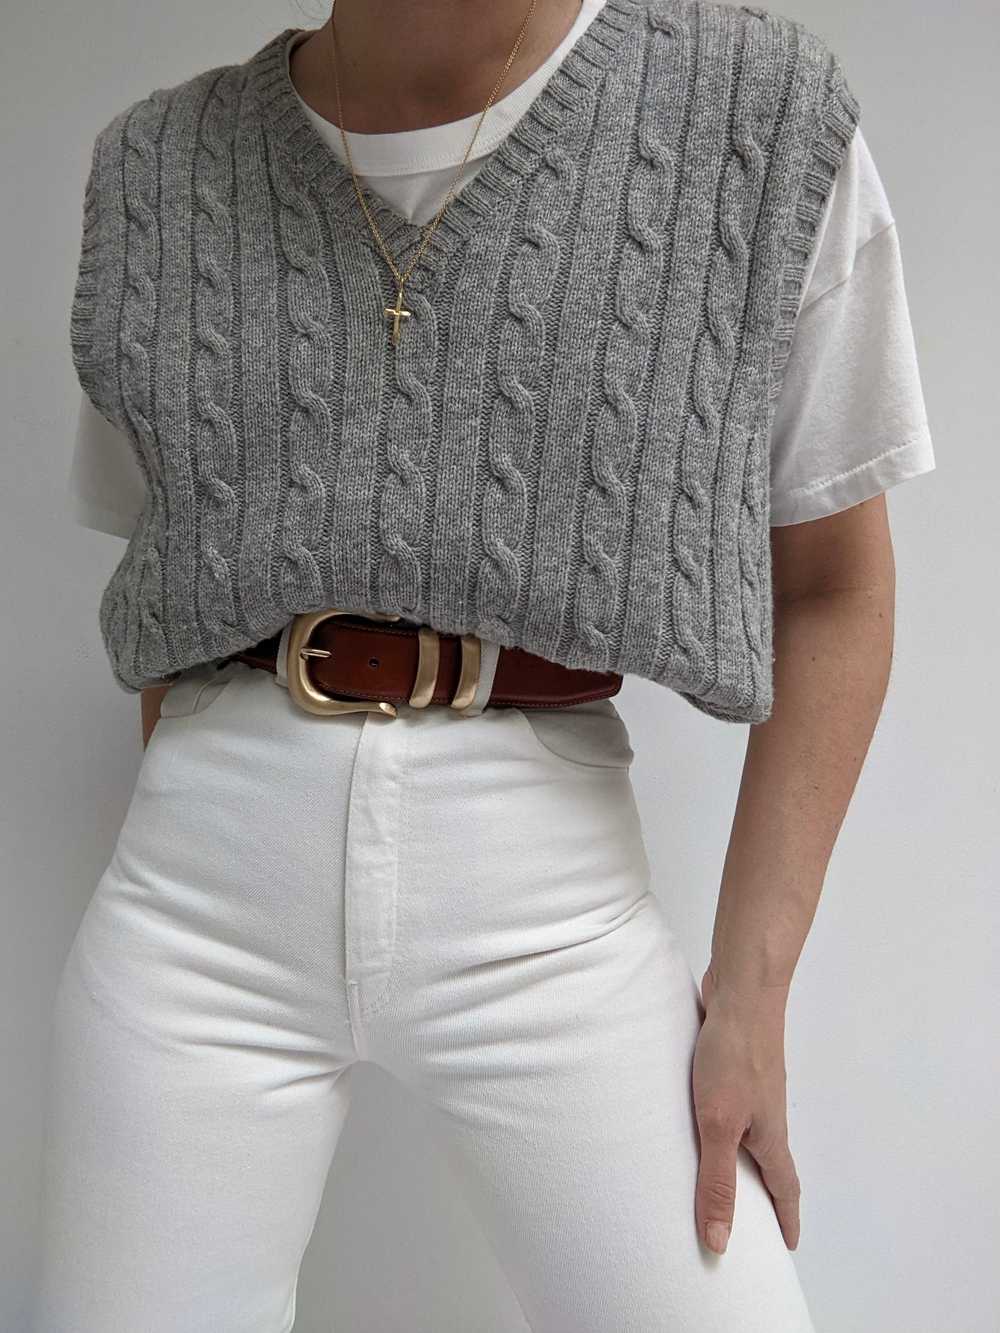 Vintage Grey Cable Knit Lambswool Sweater Vest - image 6